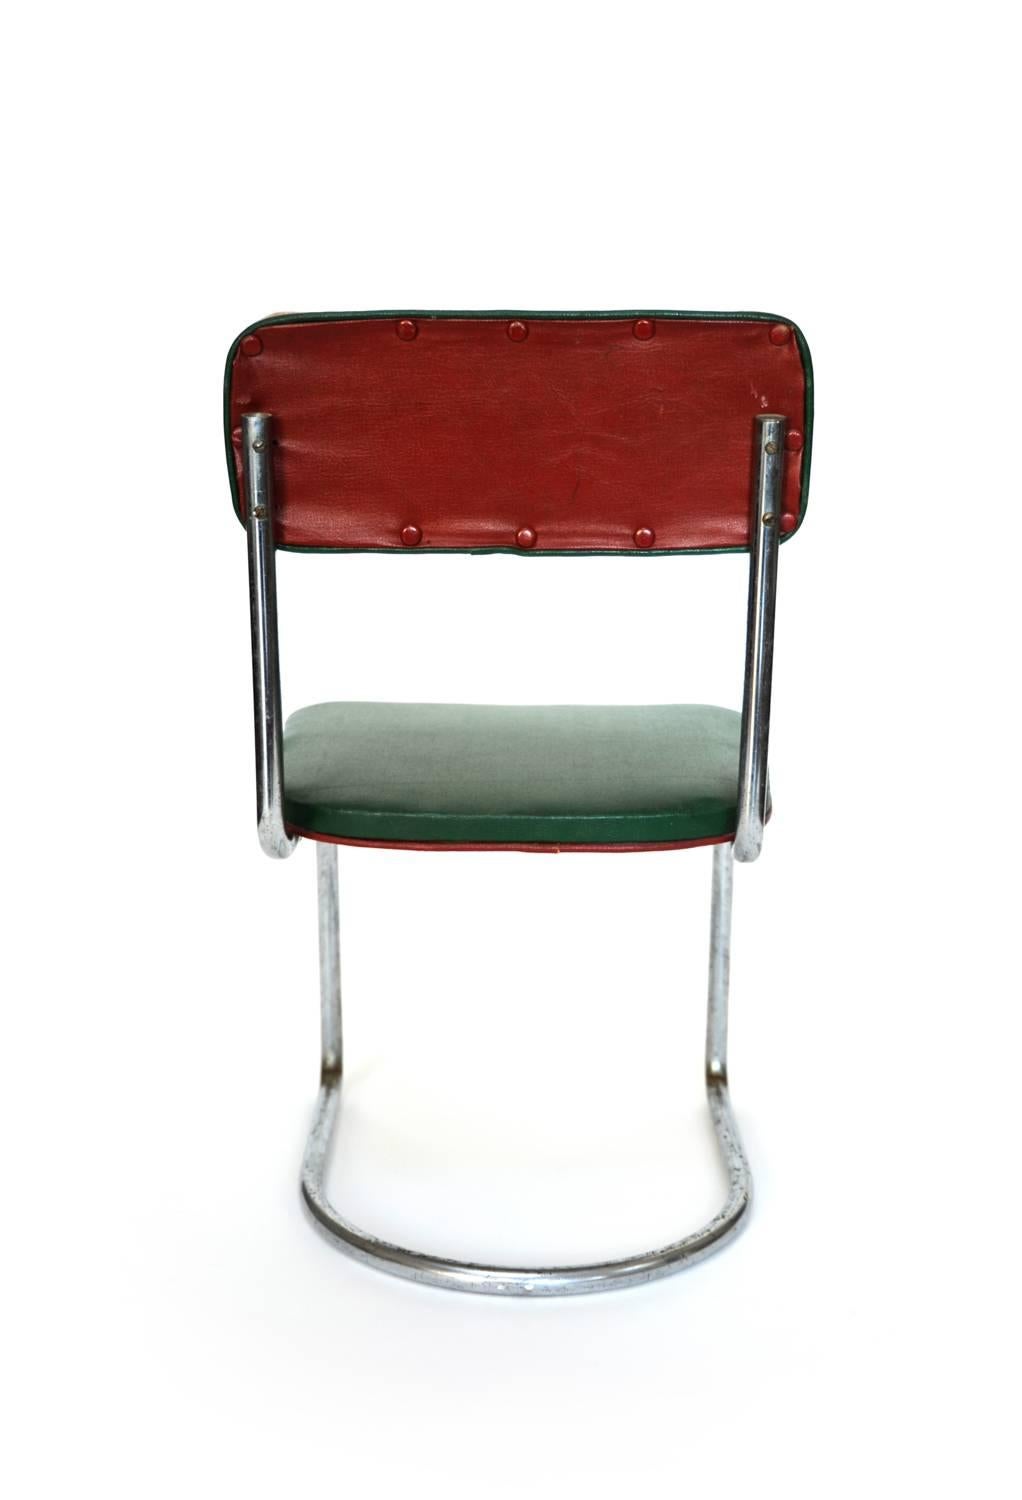 Cantilevered Tubular Steel Chair, In the Style of Marcel Breuer, France, 1940s

Vintage, France, 1940s

Tubular Steel with Green and Red Vinyl Upholstered Seat and Back

H 22 in, W 12.5 in, D 10.5 in (seat: H 11.5 in)

From a private child chair